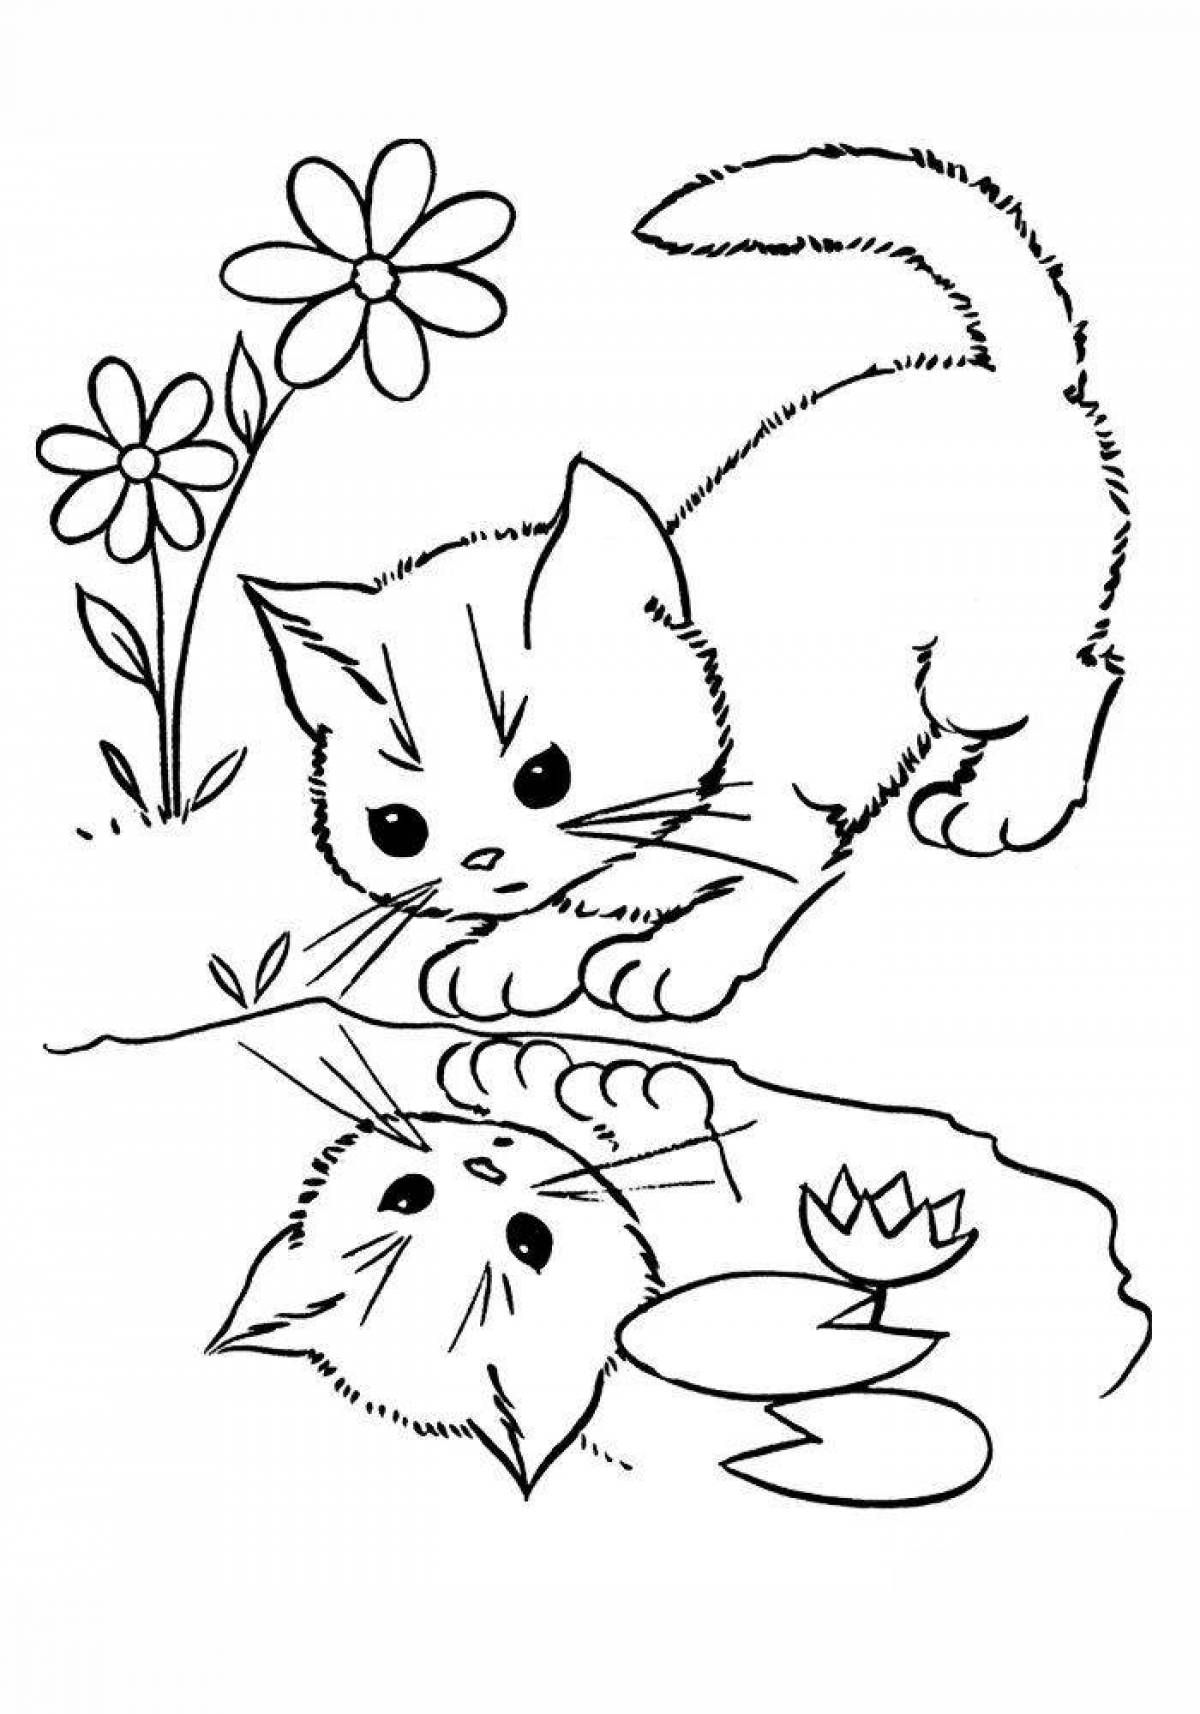 Fine cat coloring page